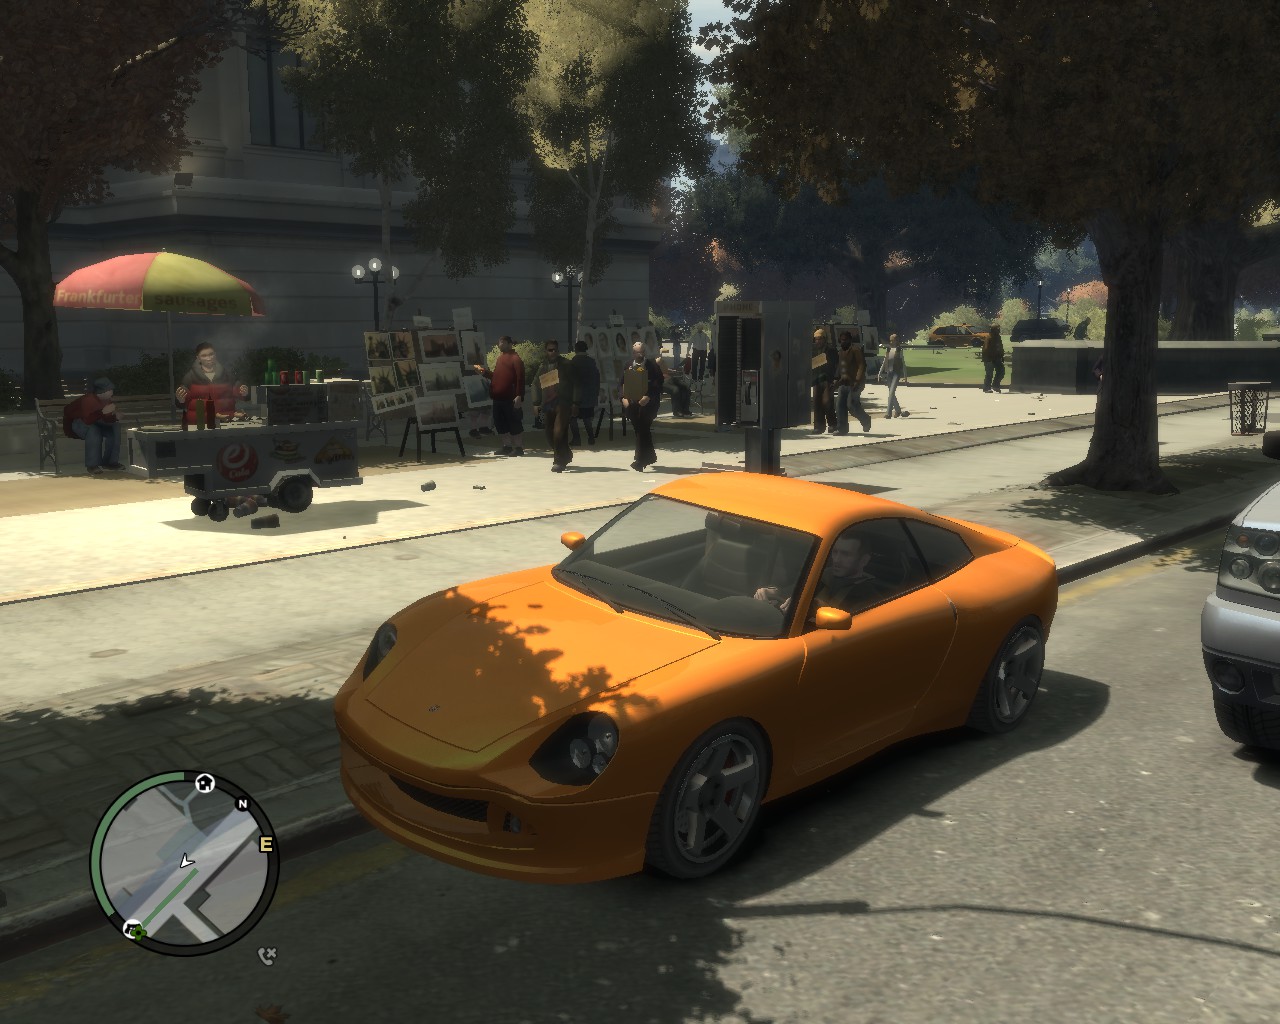 Urban intrigue and social vitality on display in _GTA IV’s_ Liberty City.